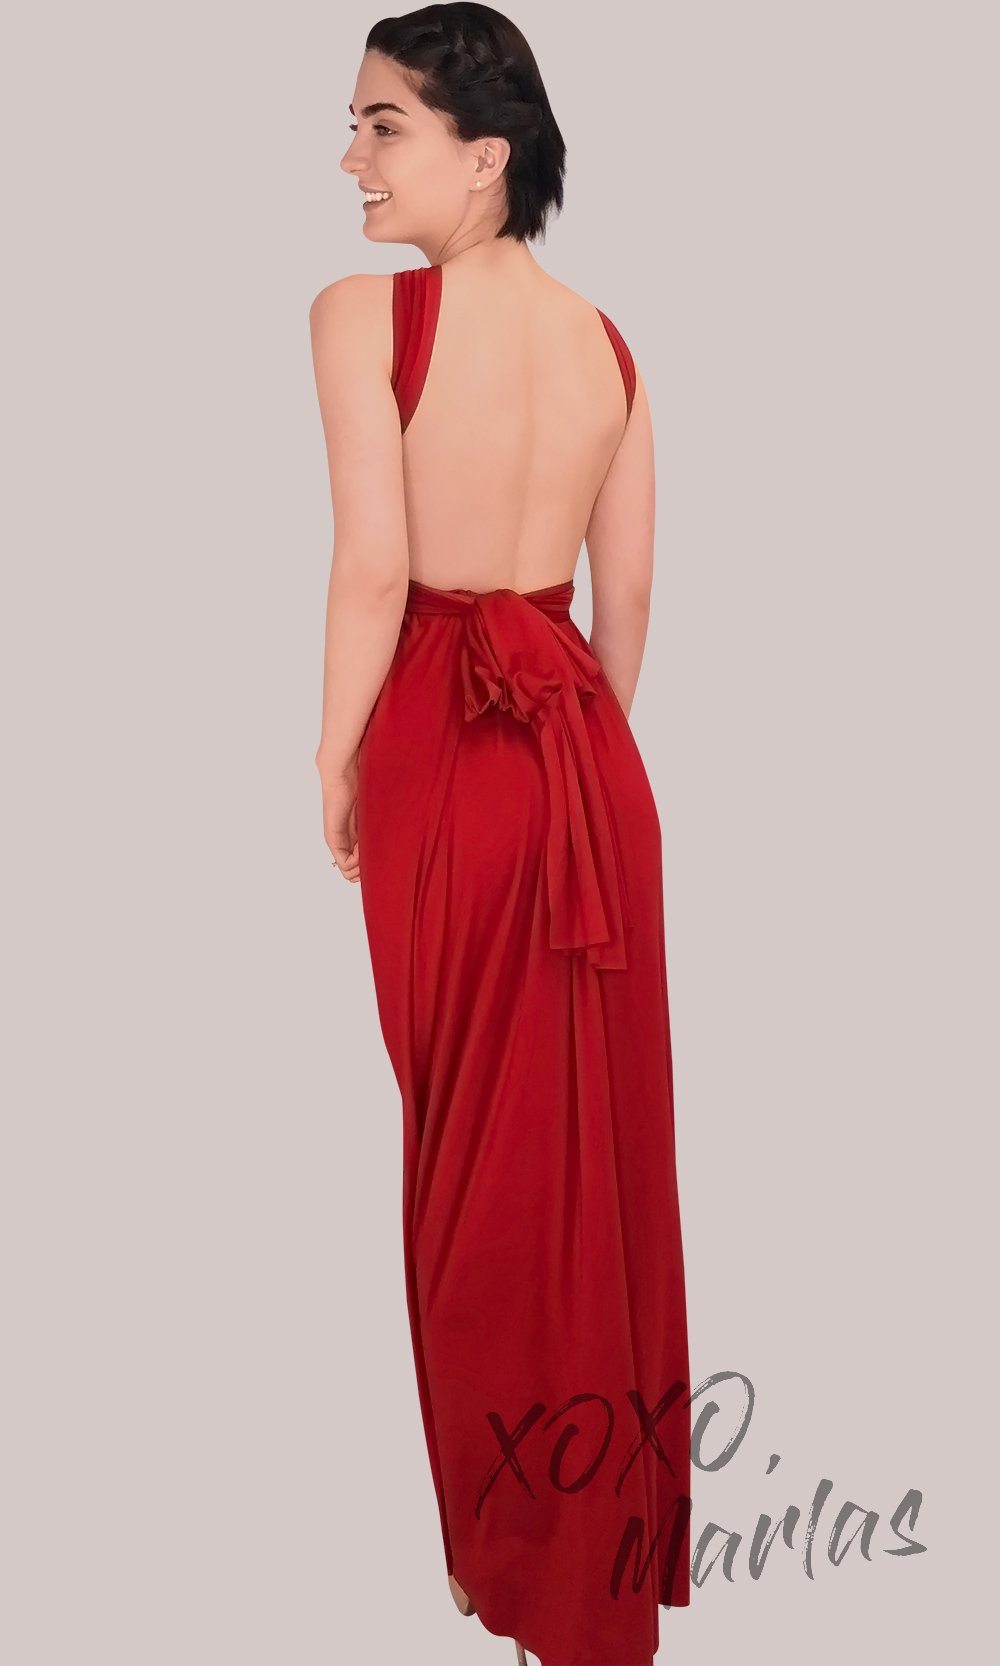 FLong red infinity bridesmaid dress or multiway dress or convertible dress.One dress worn in multiple ways.This red one size dress is great for bridesmaid, prom, destination wedding, gala, cheap western party dress, semi formal, cocktail, gala, formal